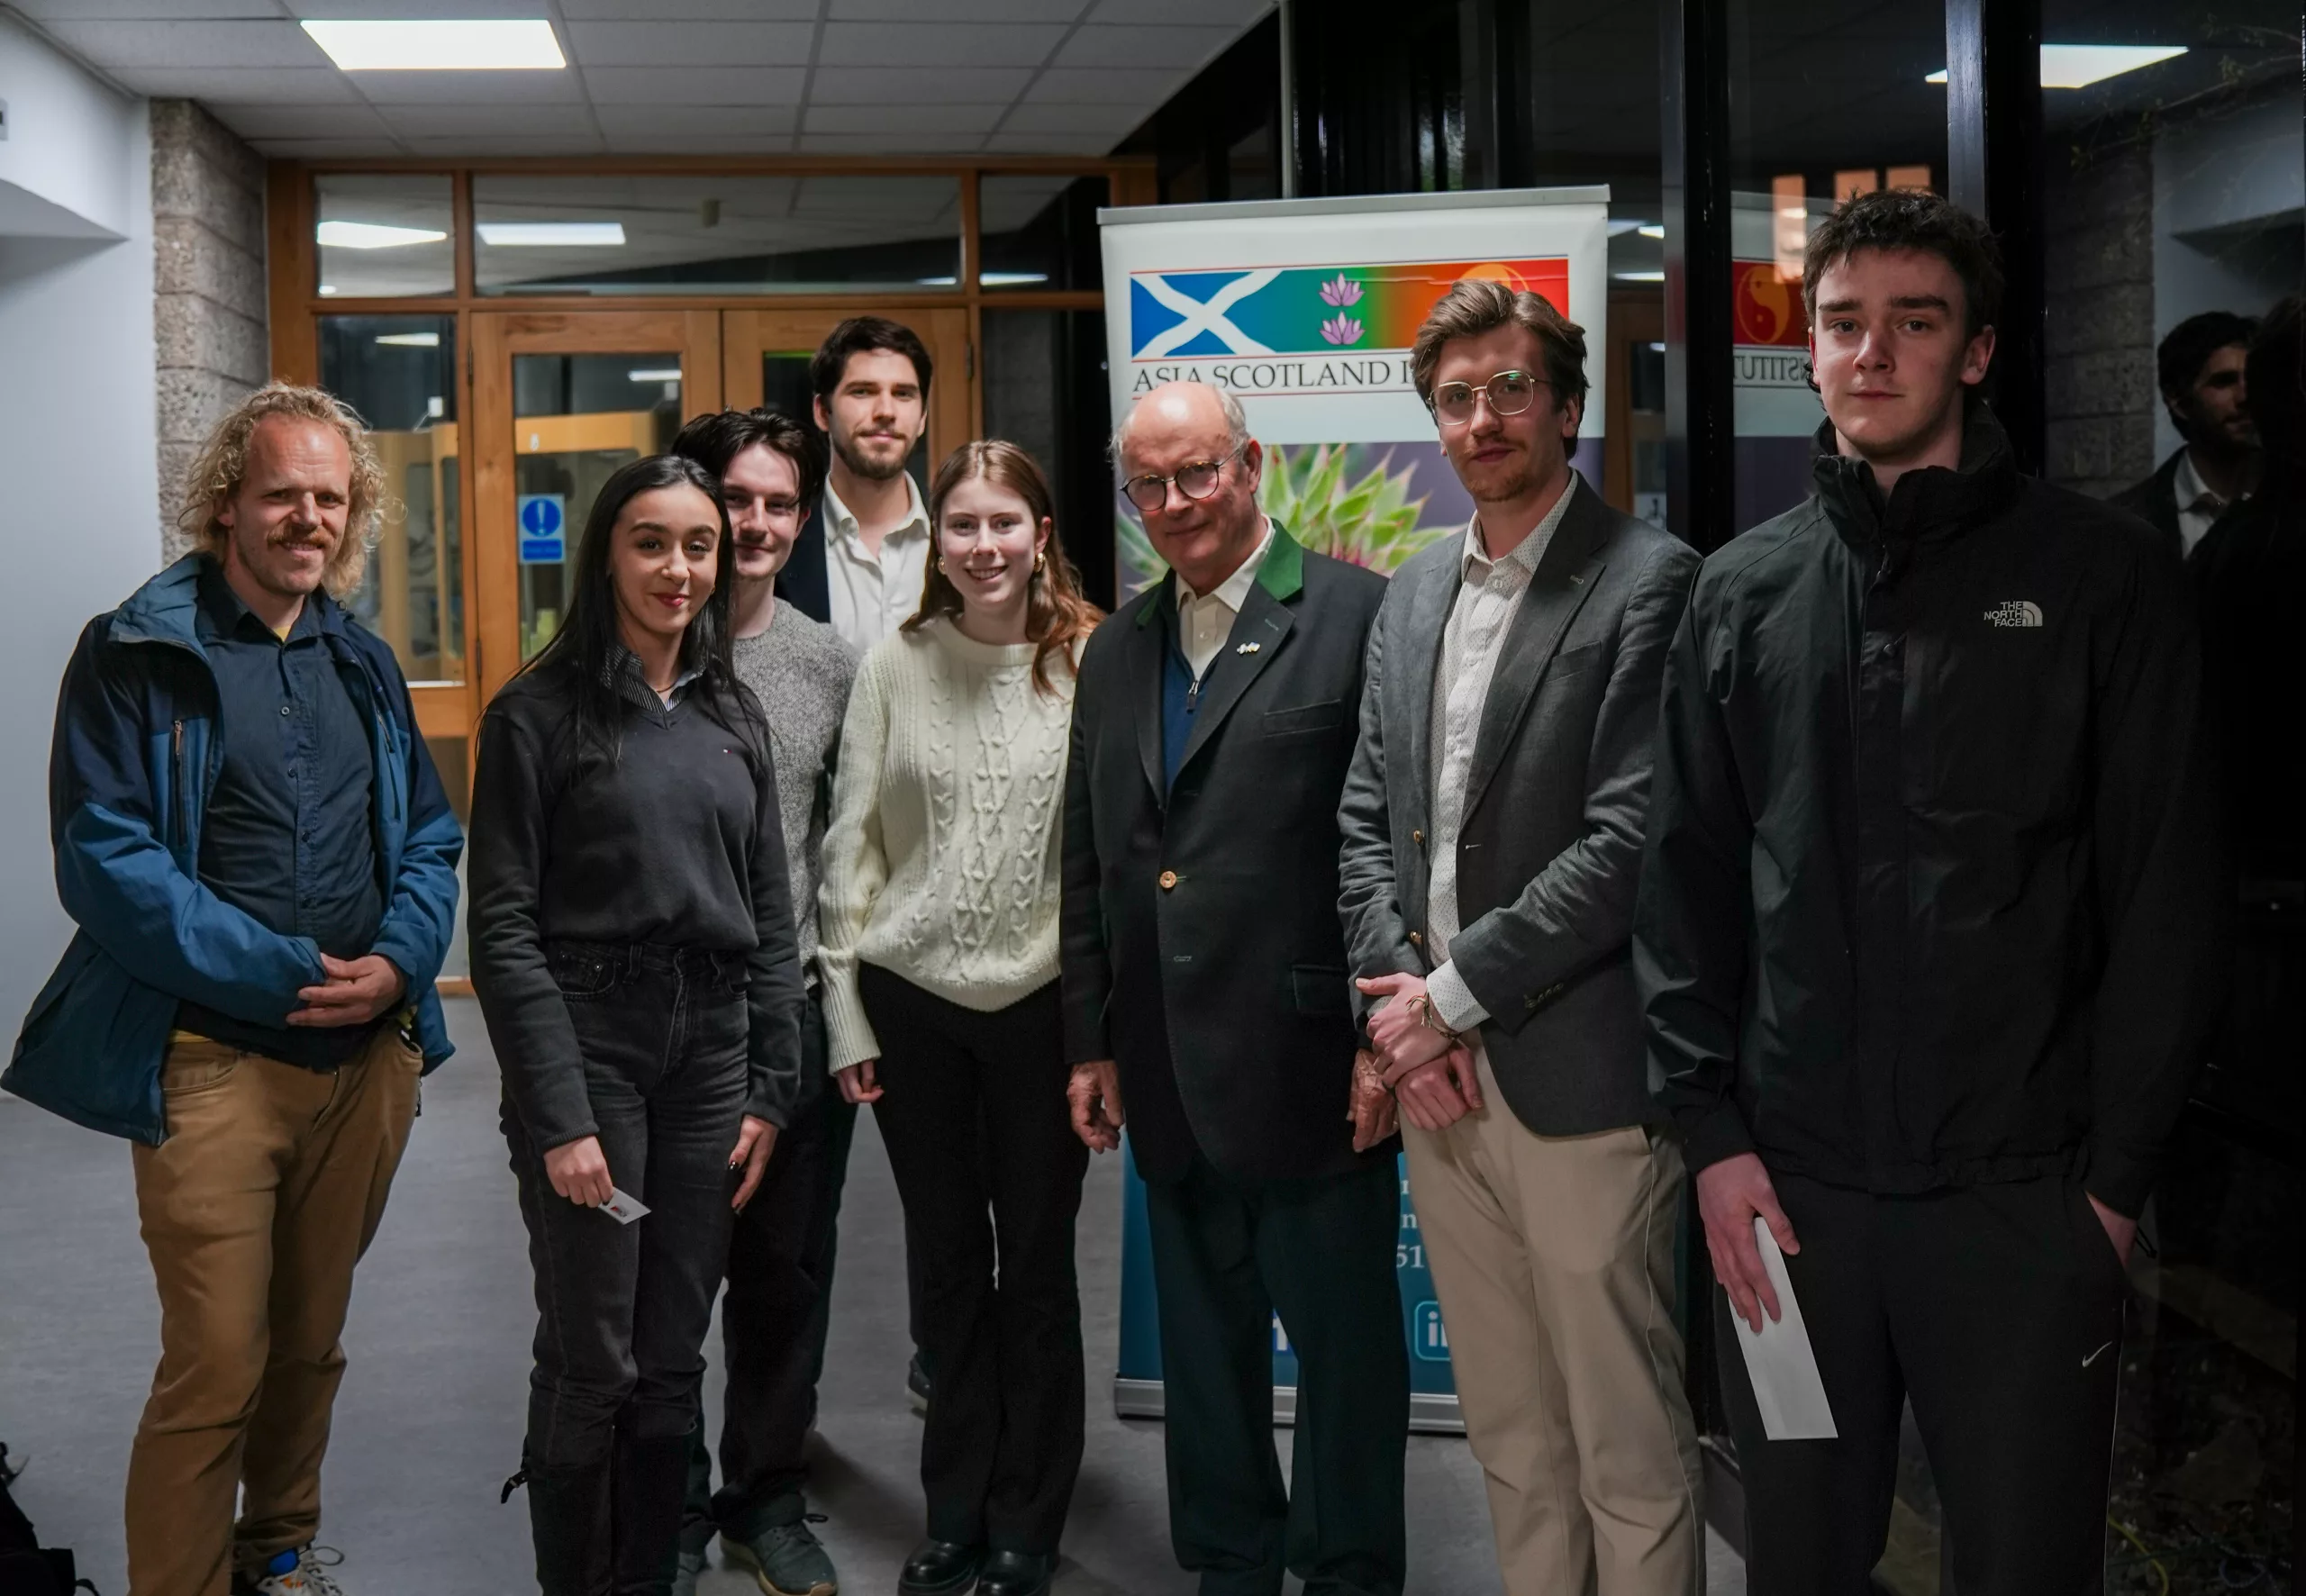 Roddy Gow at Stirling University with students